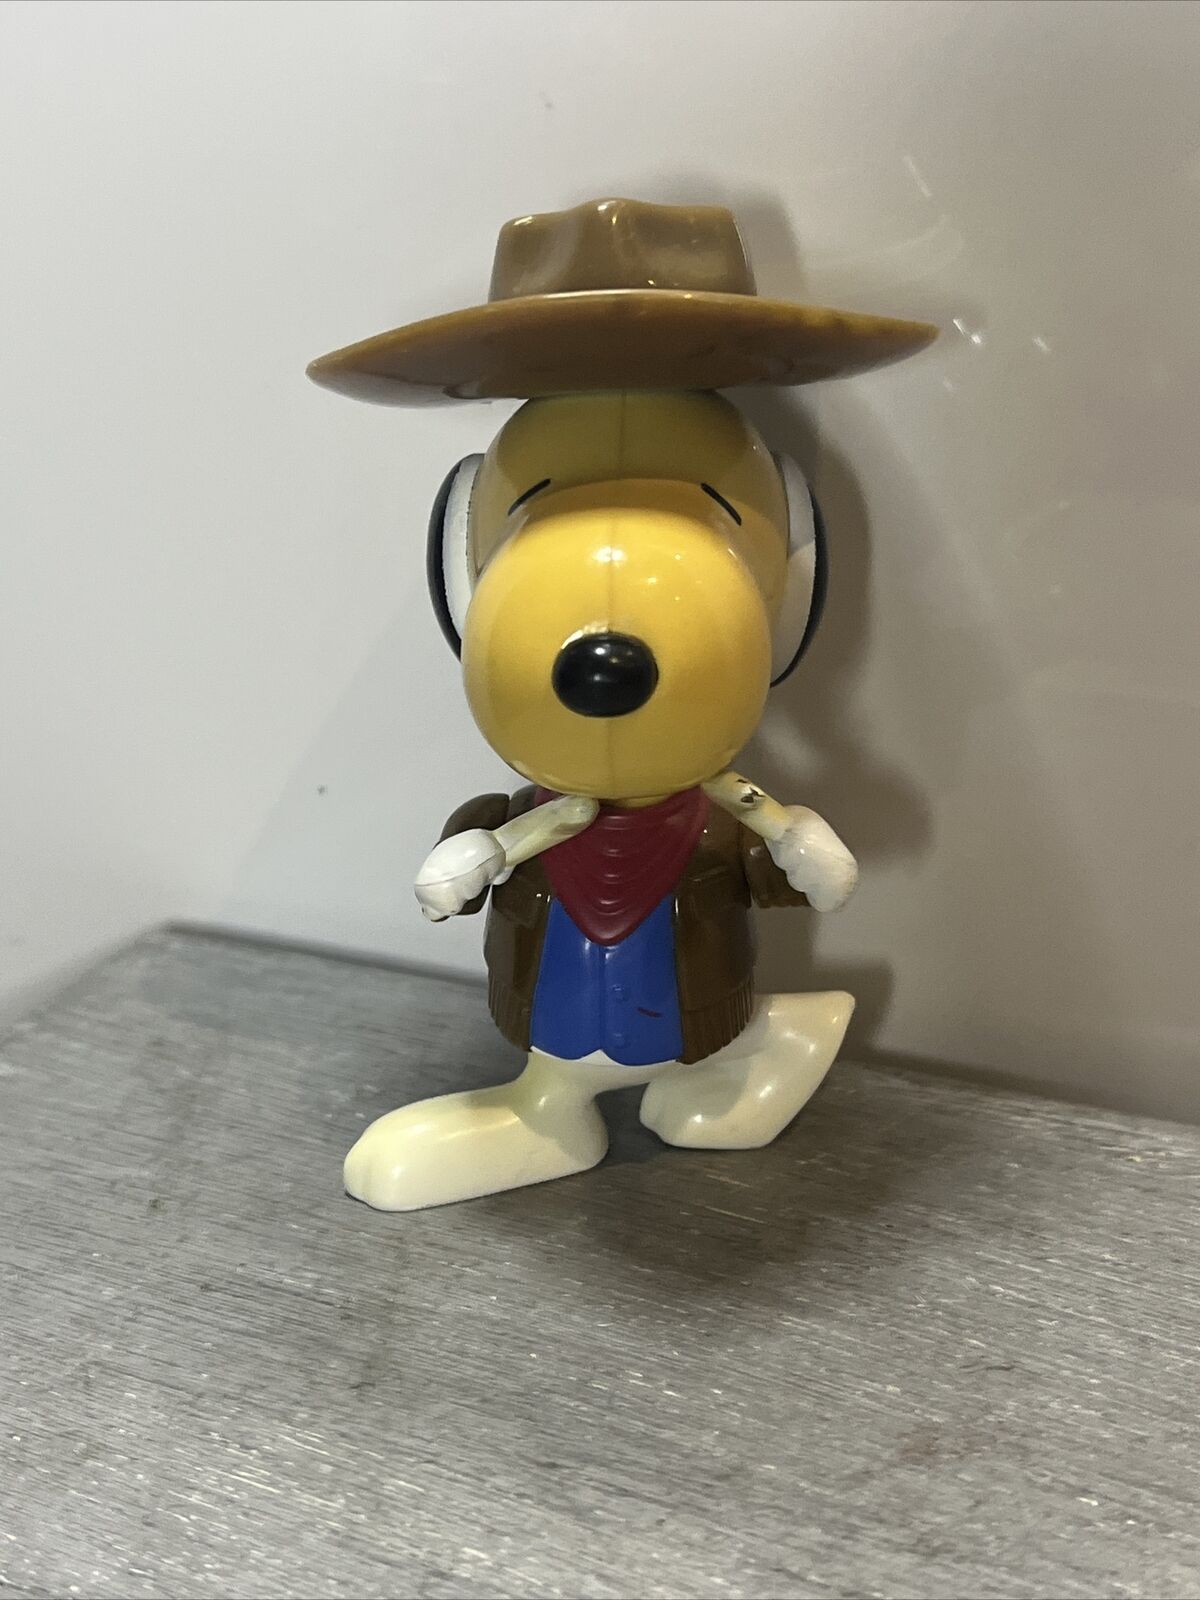 Snoopy Cow Boy 1999 Mcdonalds Collectable Toy Figurine.Does not stand on its own